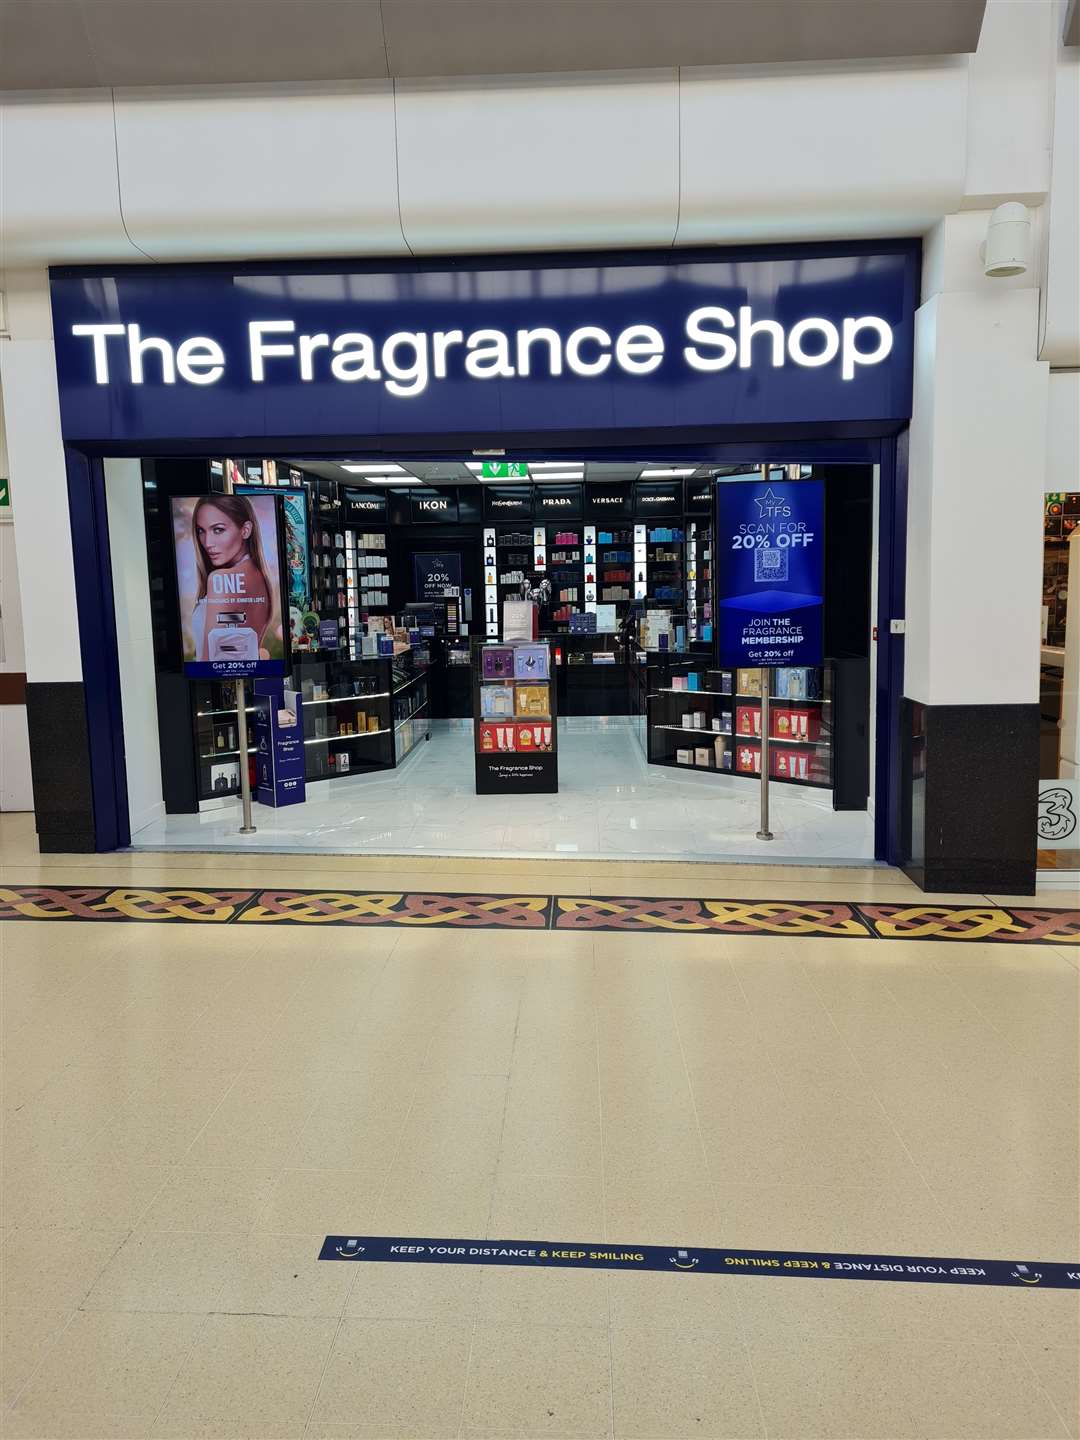 The Fragrance Shop will celebrate the official opening its new store in the Eastgate Shopping Centre in Inverness on Saturday.